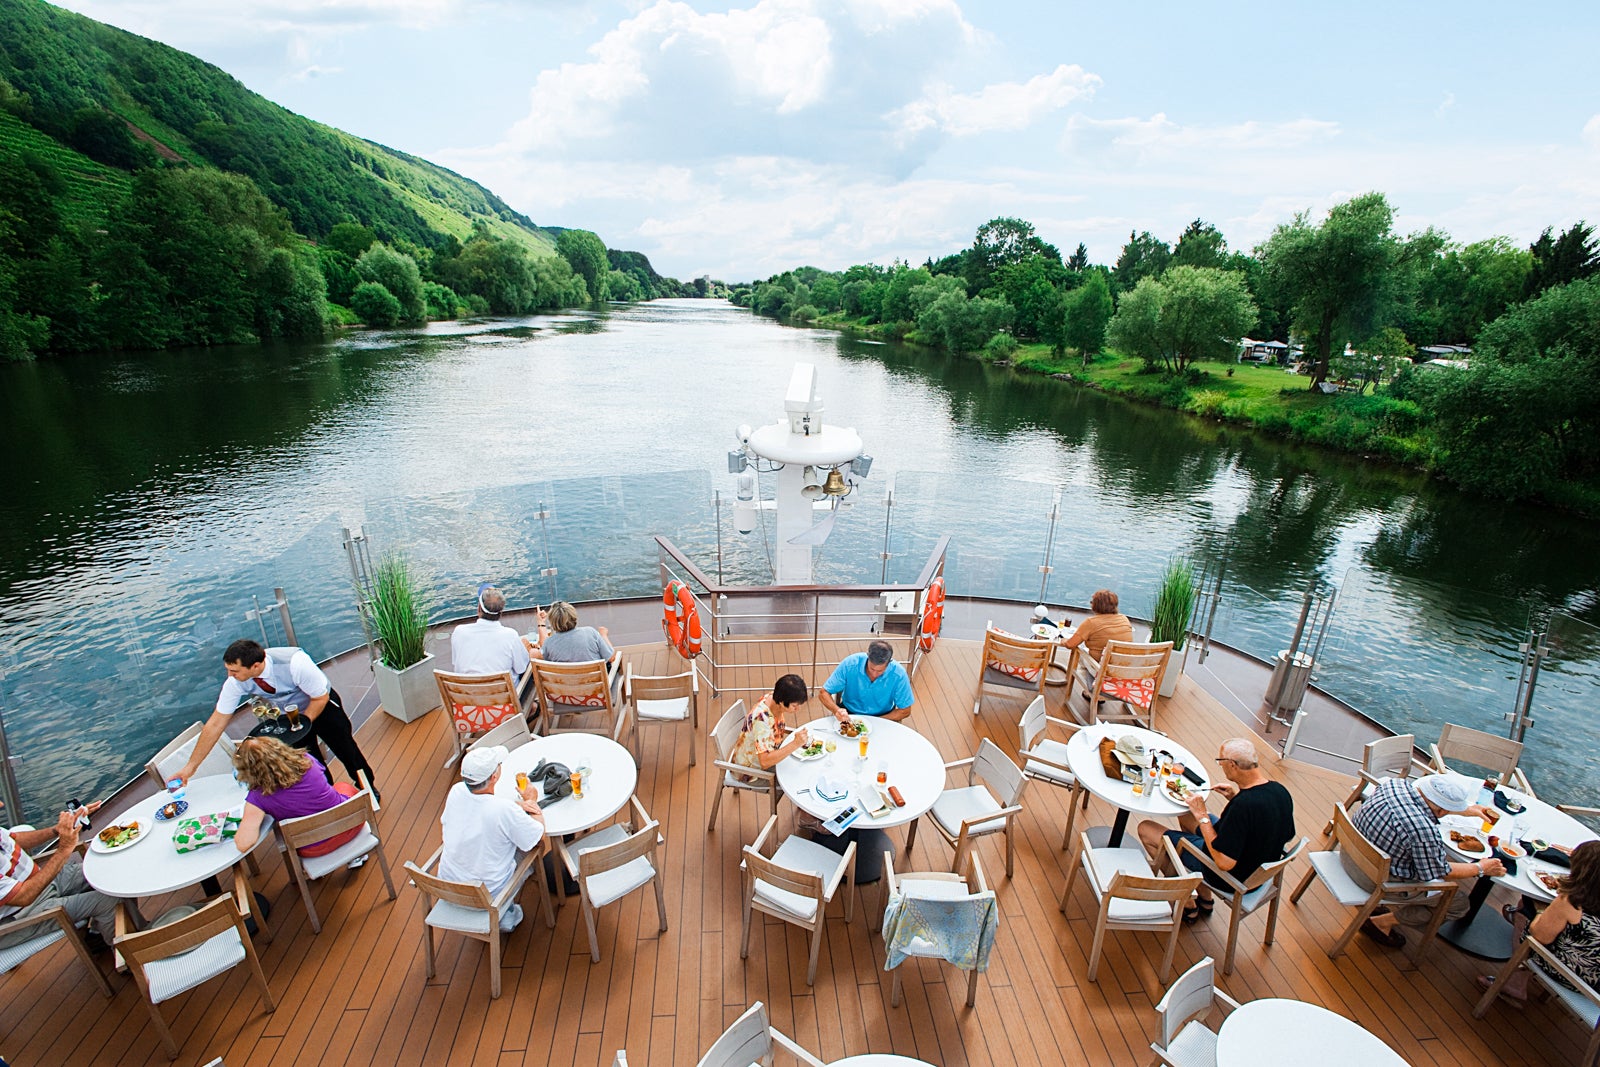 difference between river cruise companies